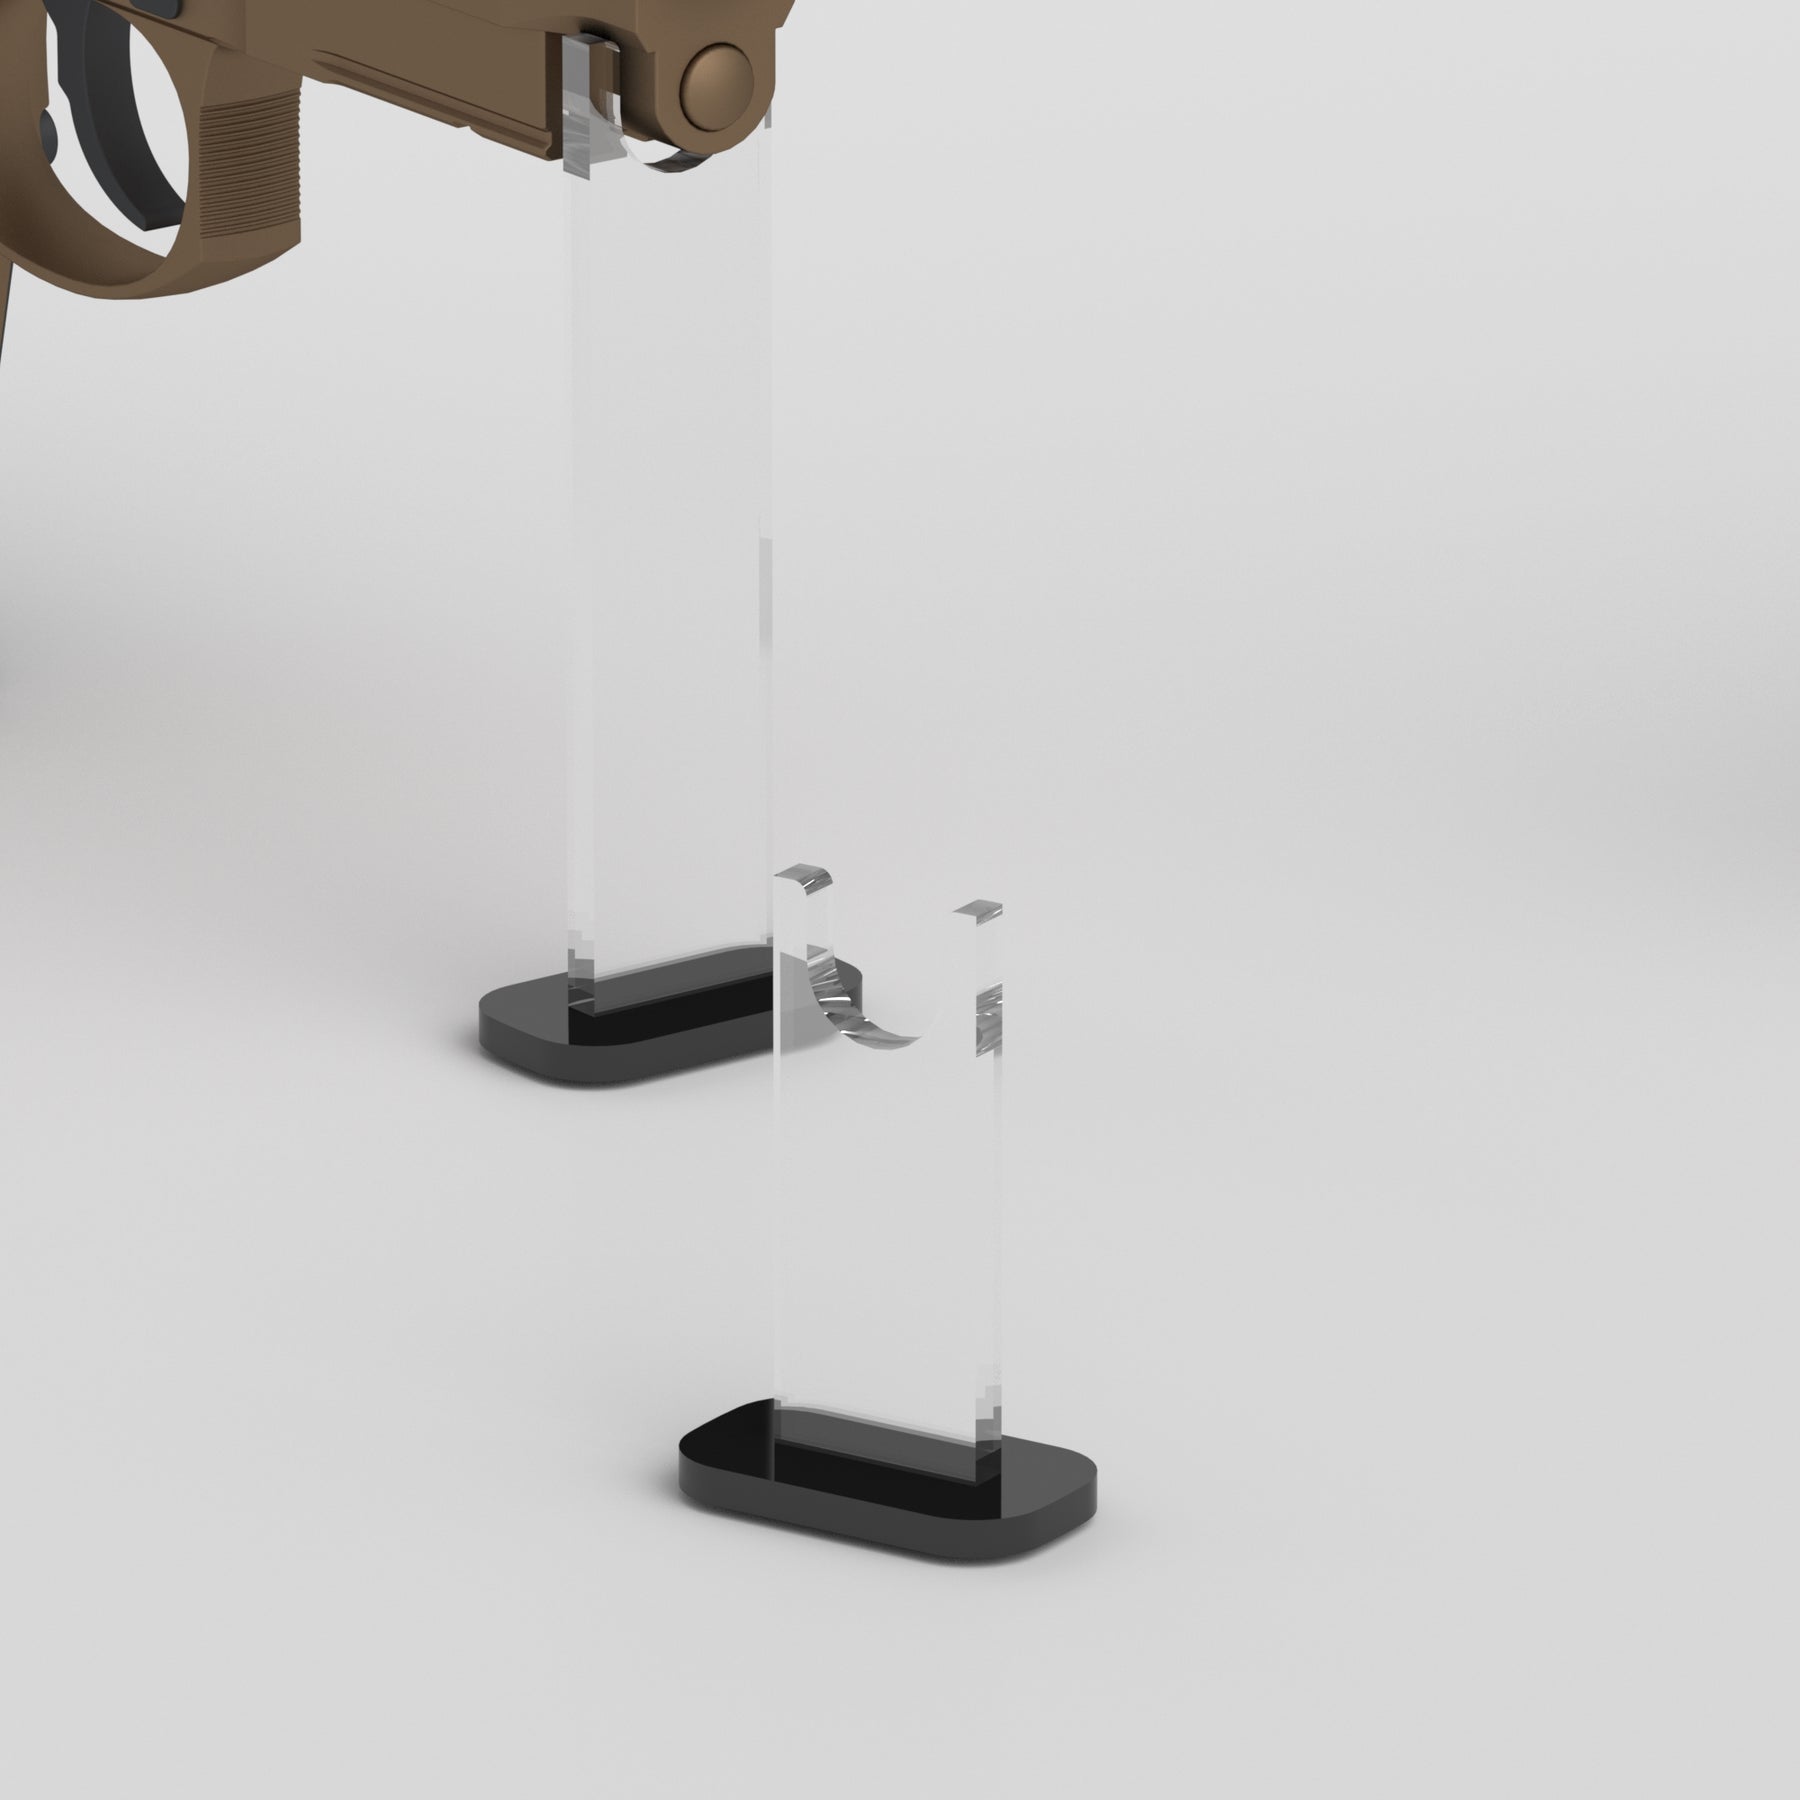 Pistol Revolver Display Stand - With Base / PW-06